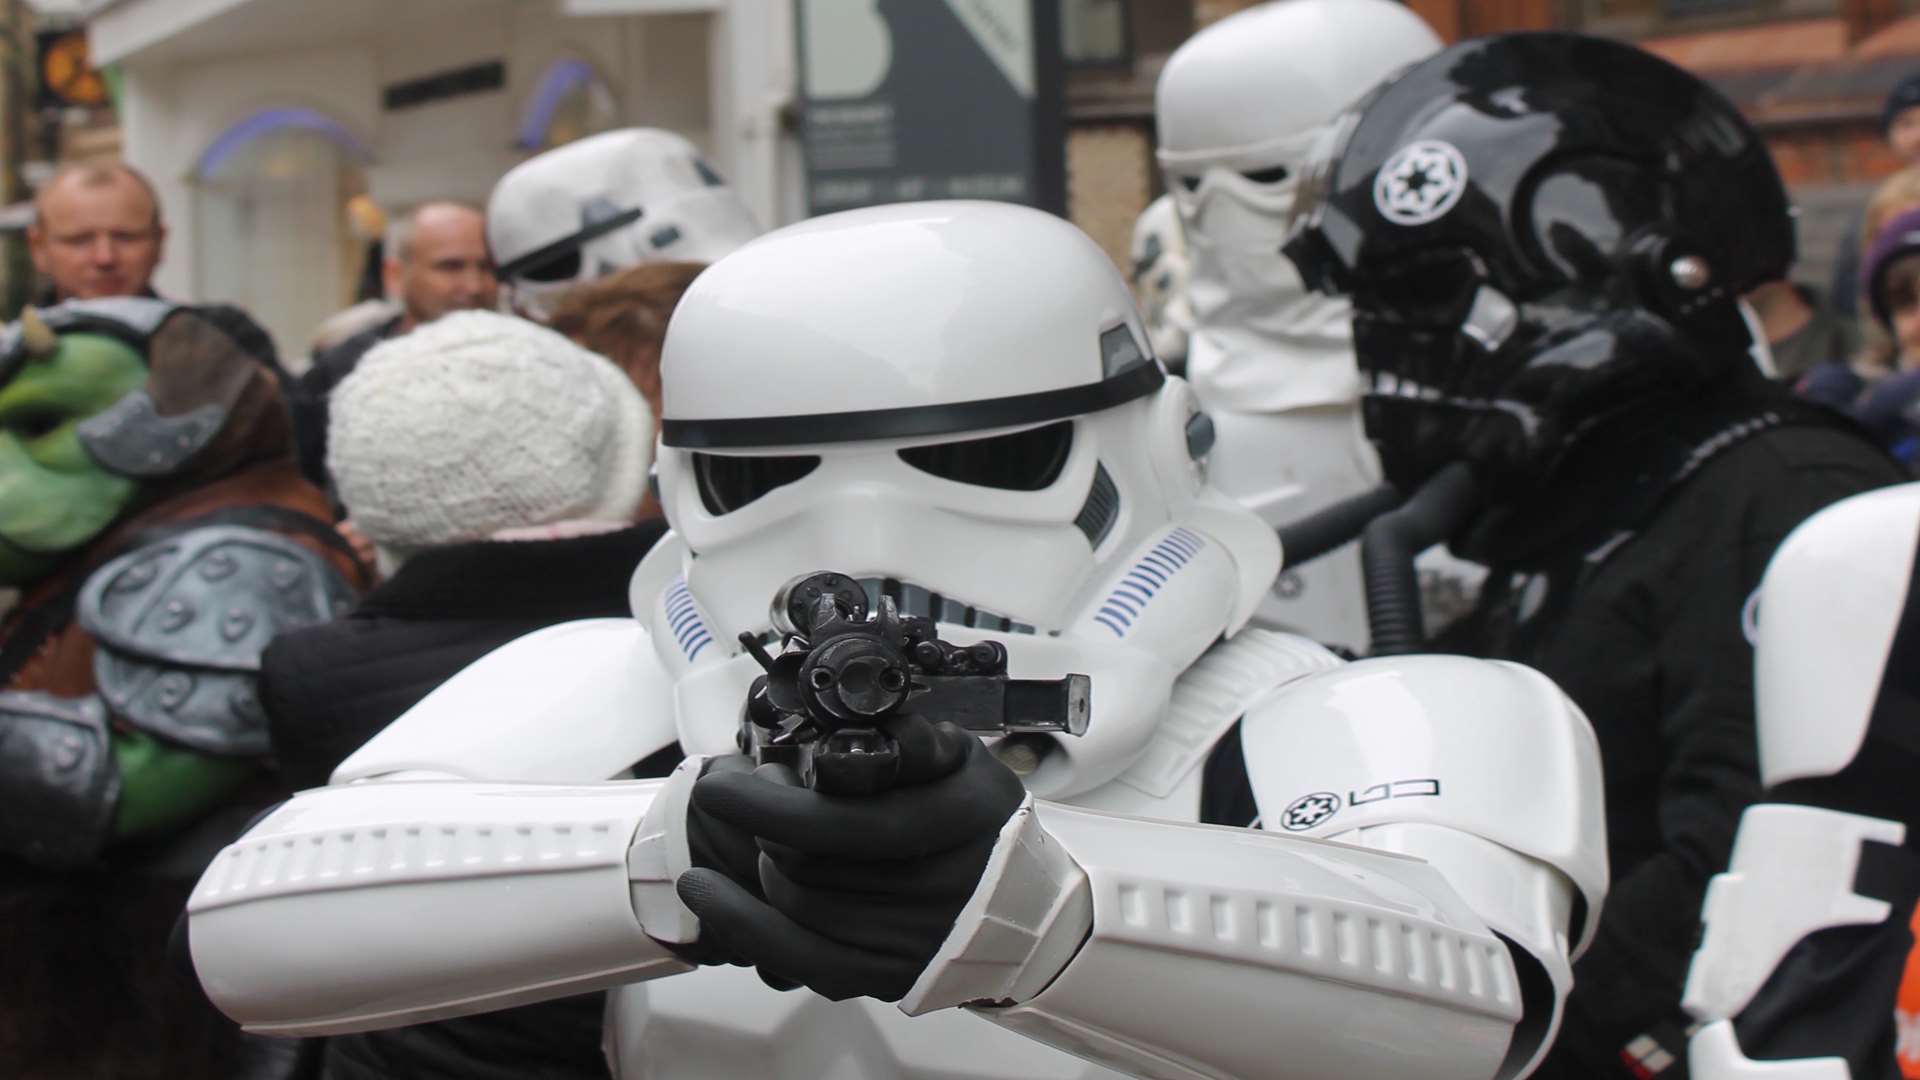 Stormtroopers will return to The Beaney to mark the fifth anniversary since its reopening